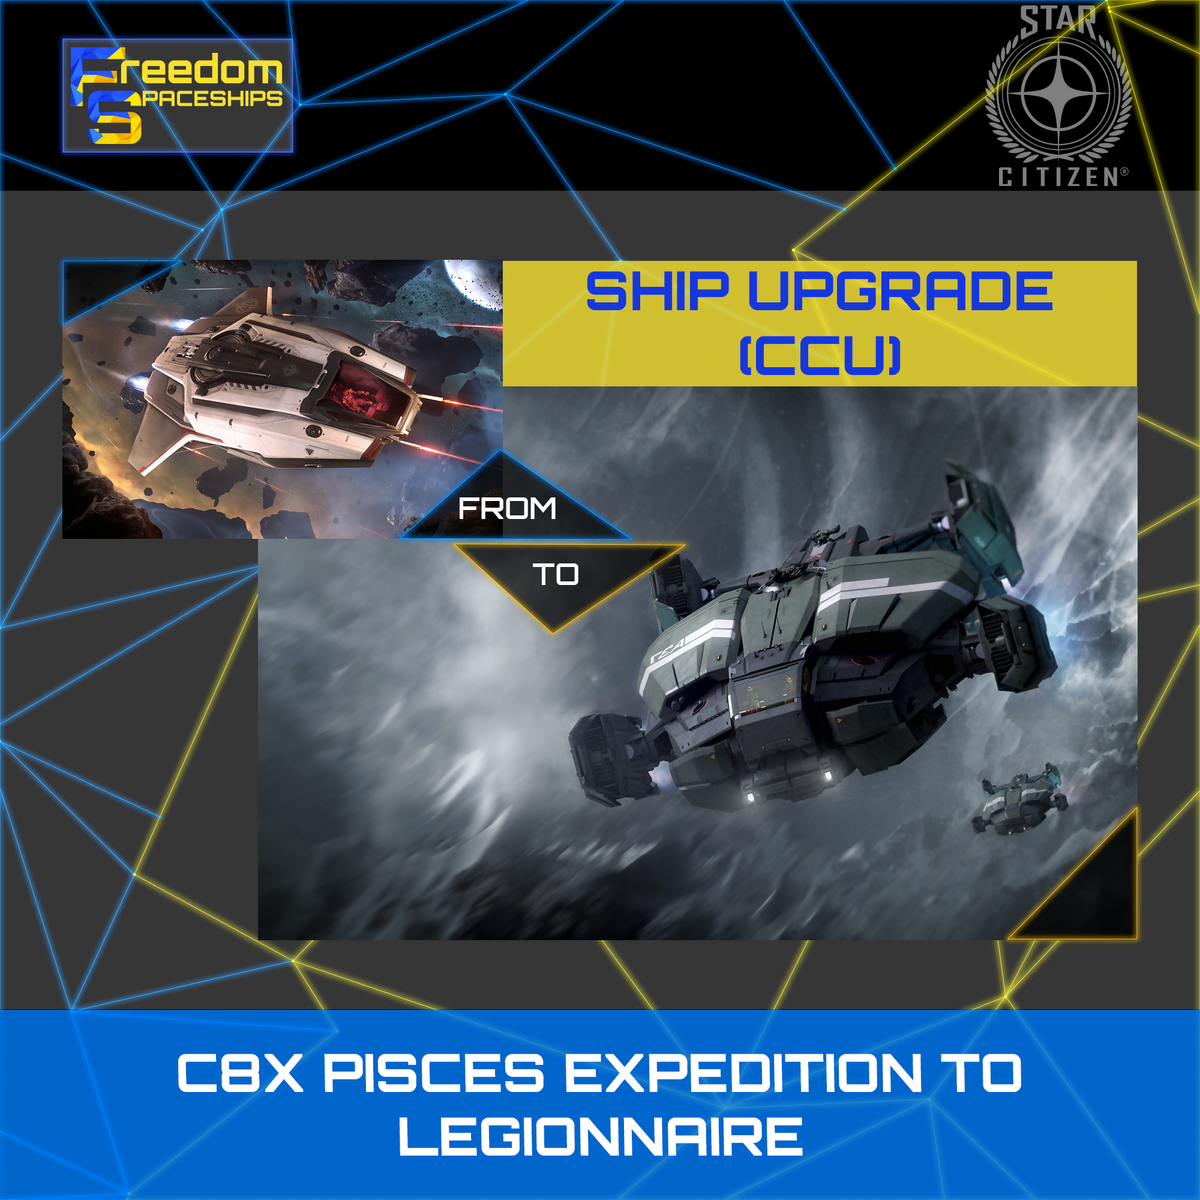 Upgrade - C8X Pisces Expedition to Legionnaire